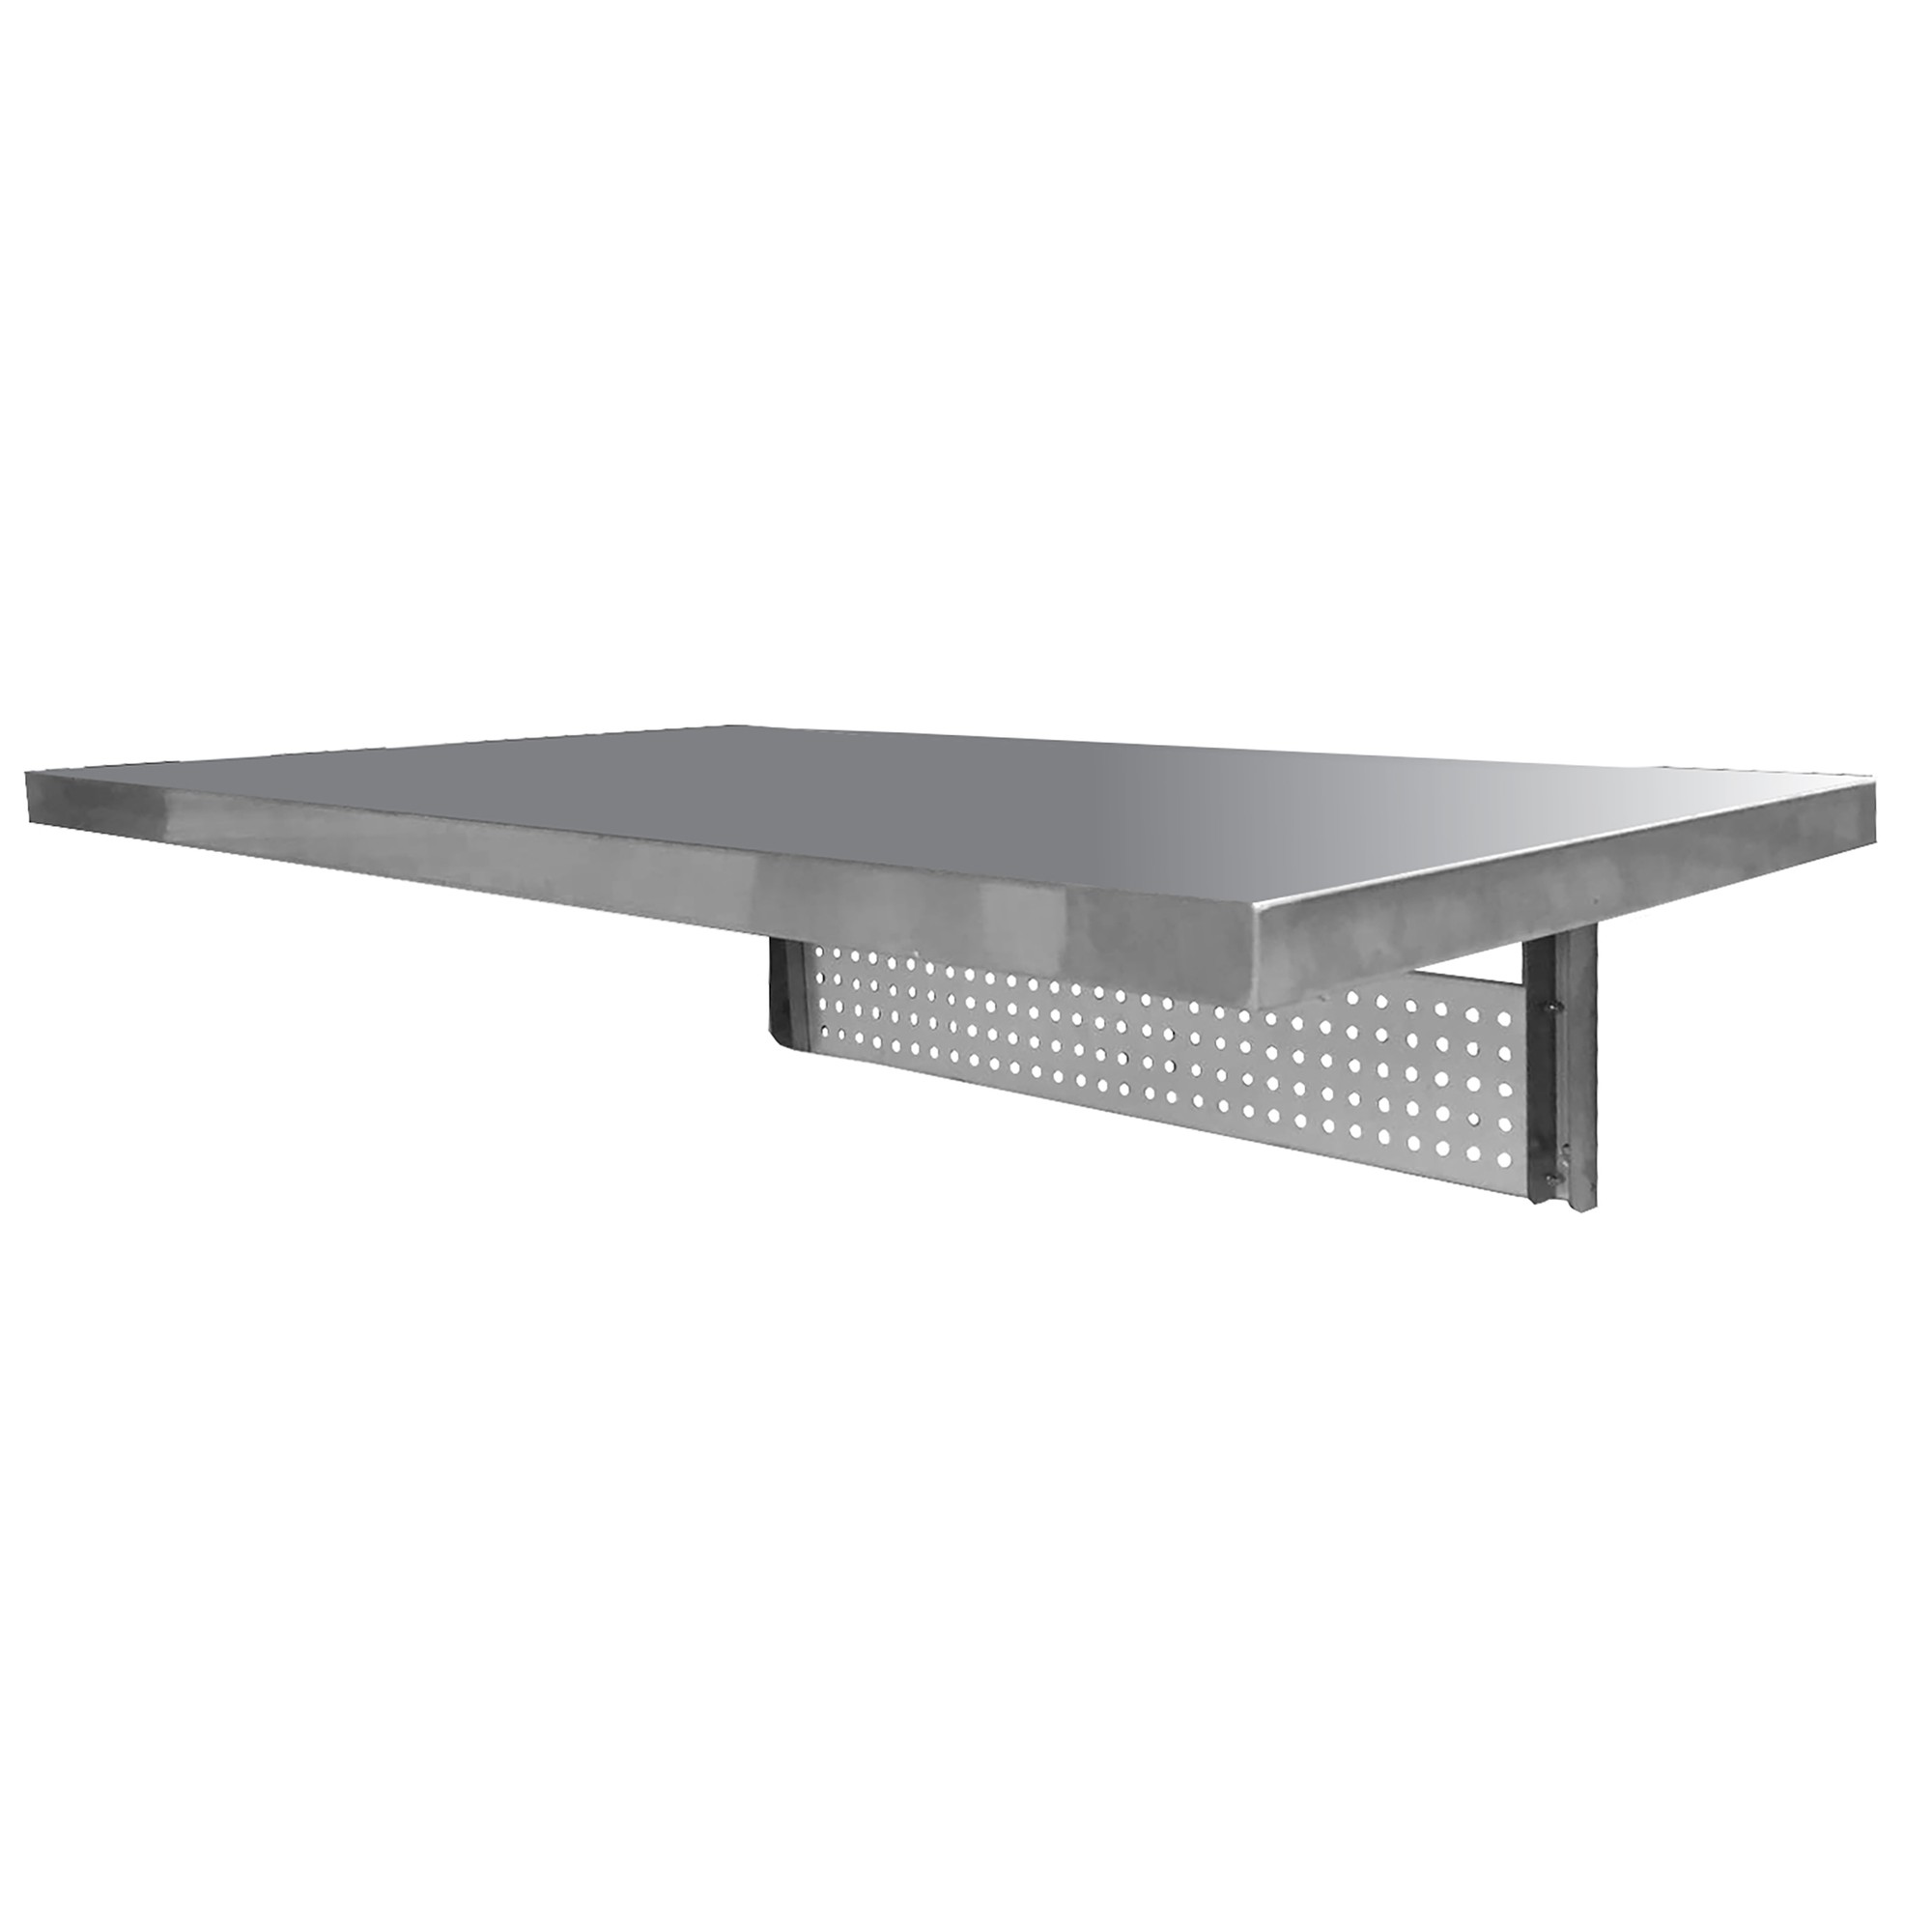 Space Saving Stainless Steel Wall Mount Work Table